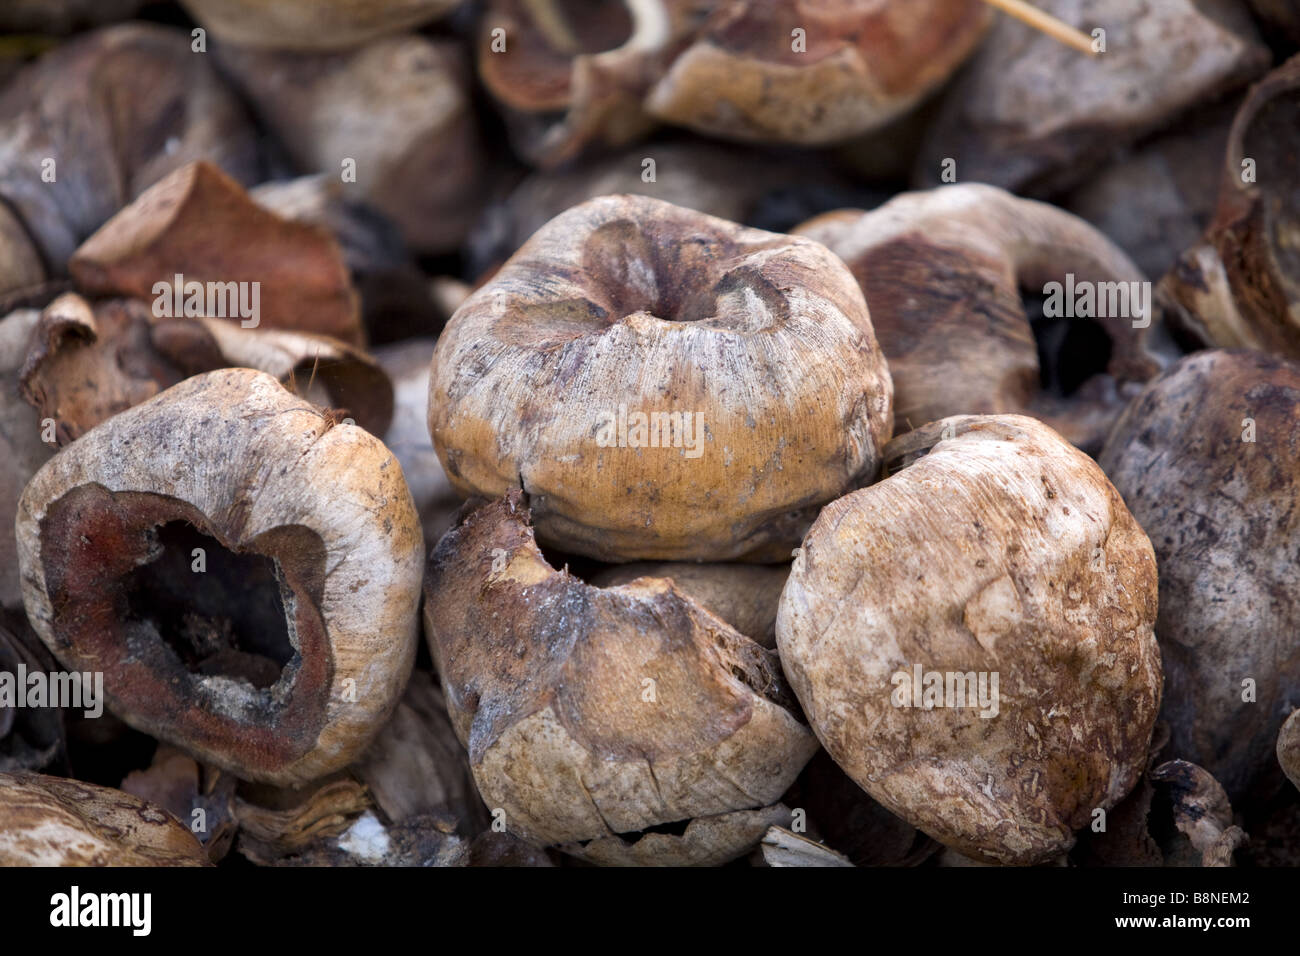 Close up shot of a pile of coconut shells Stock Photo